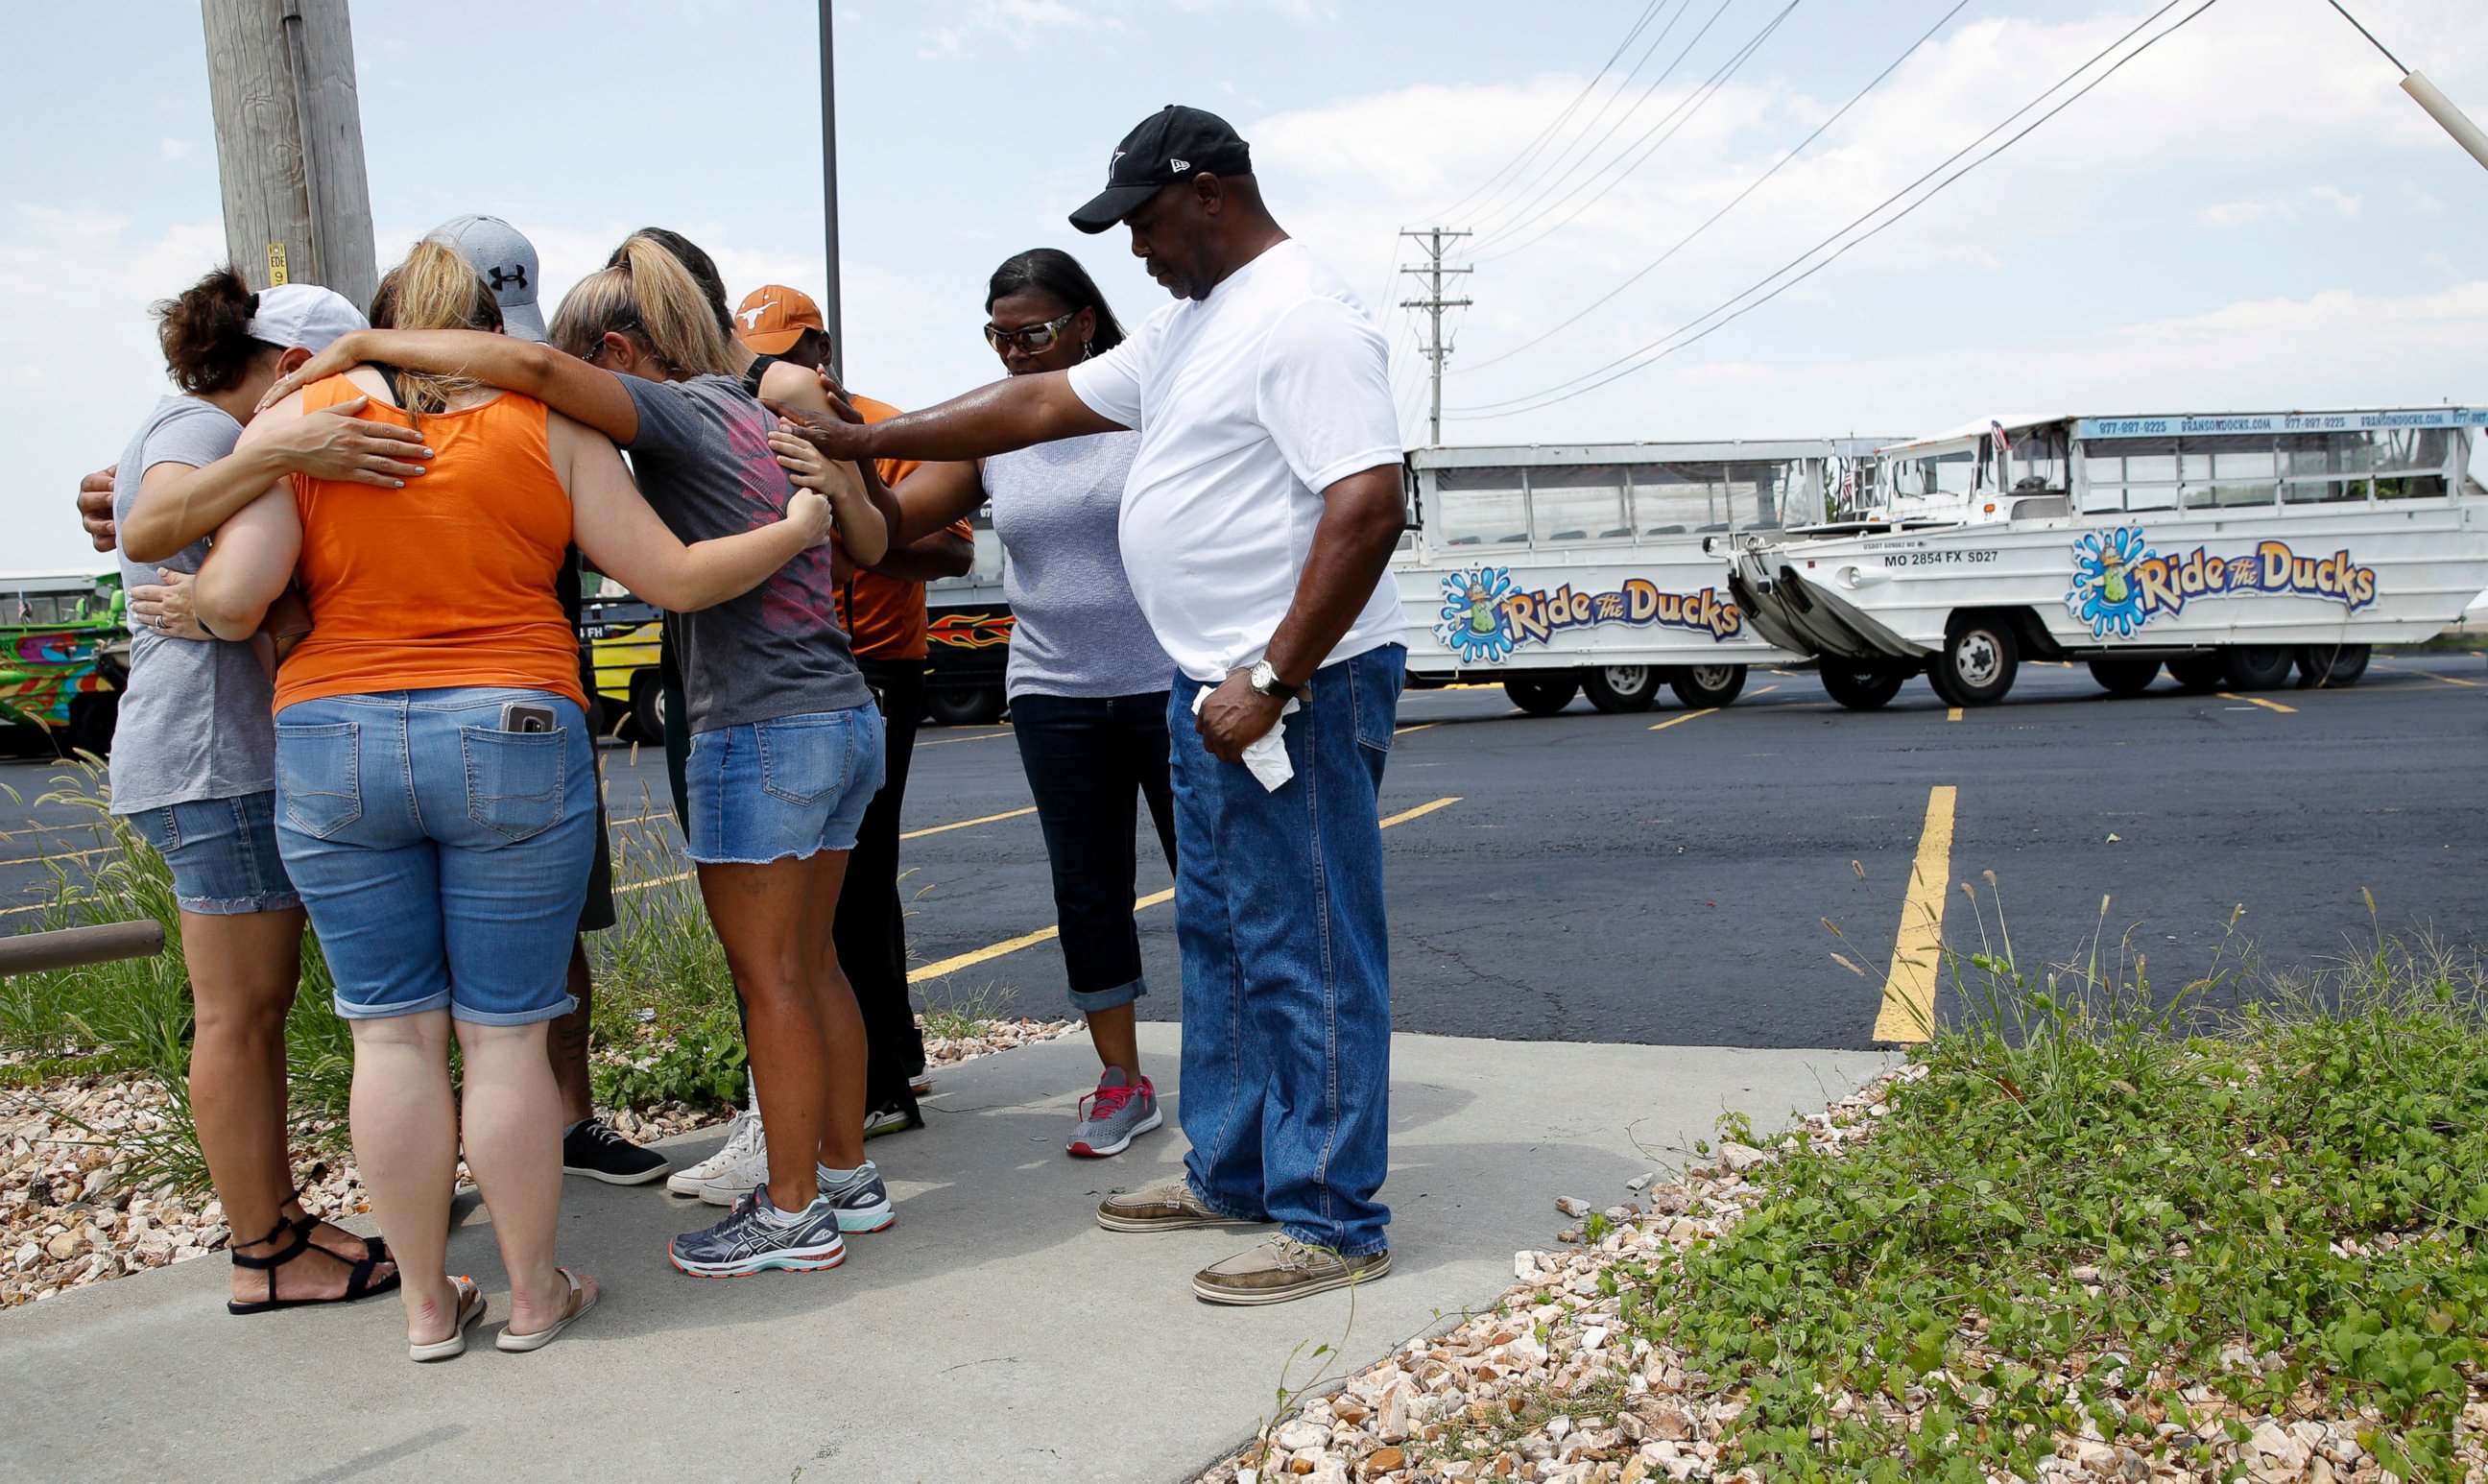 People pray outside Ride the Ducks, an amphibious tour operator involved in a boating accident on Table Rock Lake, Friday, July 20, 2018 in Branson, Mo.